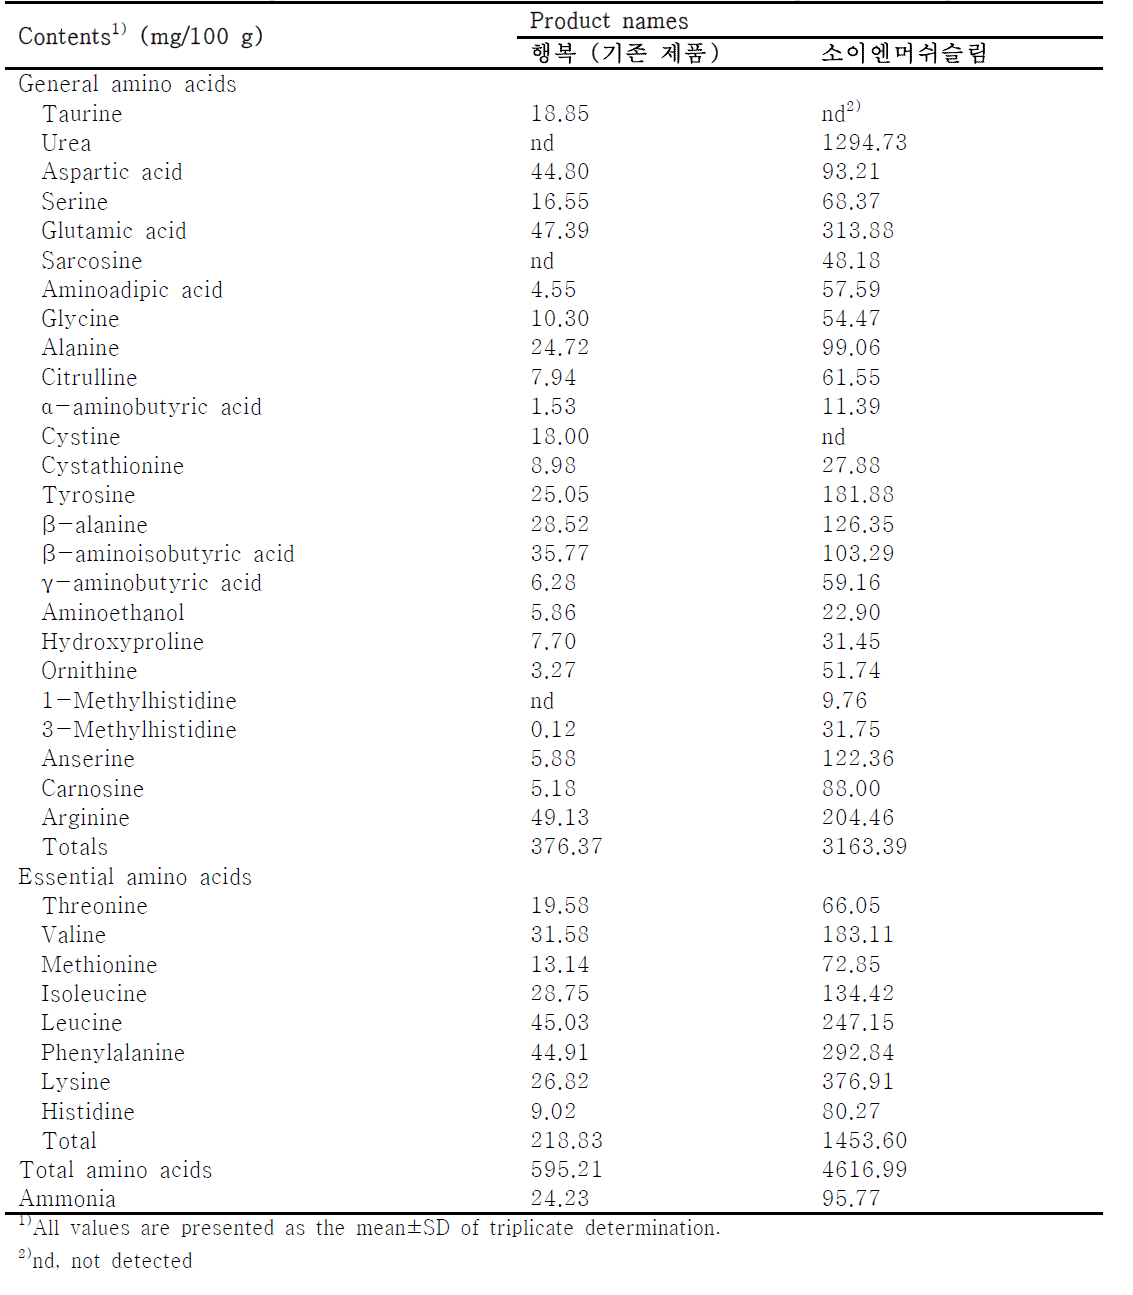 Comparison of free amino acid contents in the products of granule